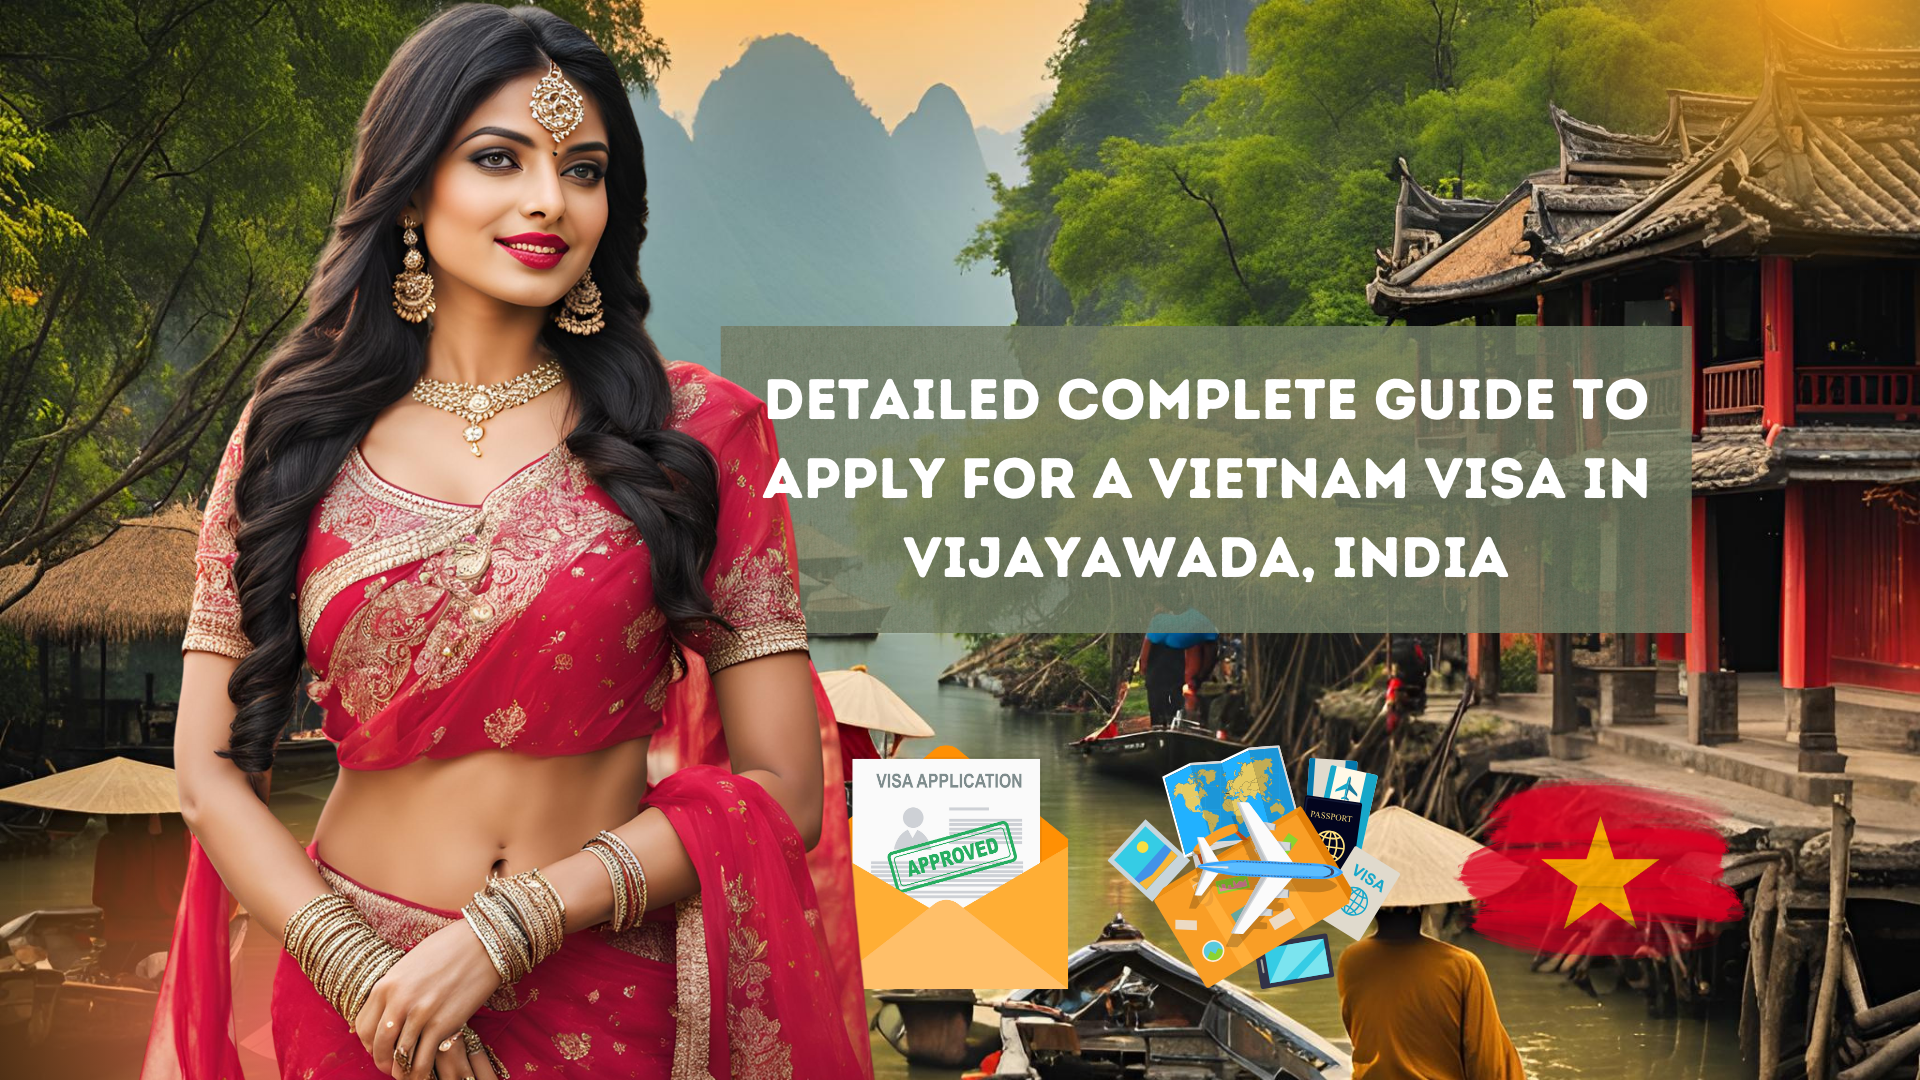 Detailed Complete Guide to Apply for a Vietnam Visa in Vijayawada, India